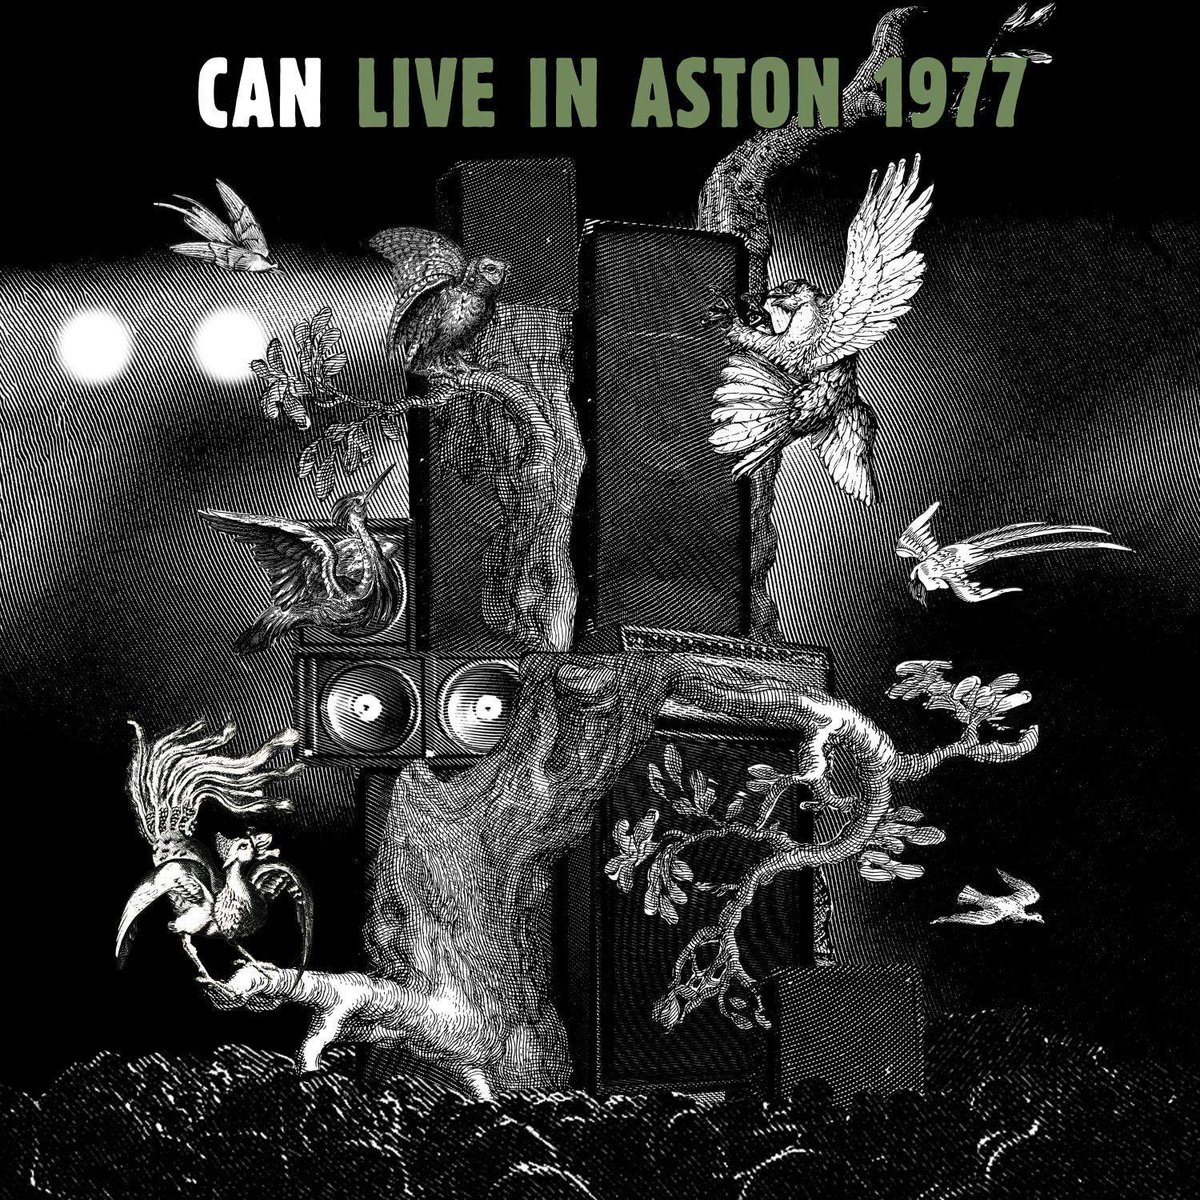 WIN! - A Copy of 'Live in Aston 1977' by Can The latest entry in the krautrock group’s live archival series drops this week via @MuteUK, and we’re giving away a vinyl copy. Simply like, share, and give us a follow to be entered. normanrecords.com/records/202918…